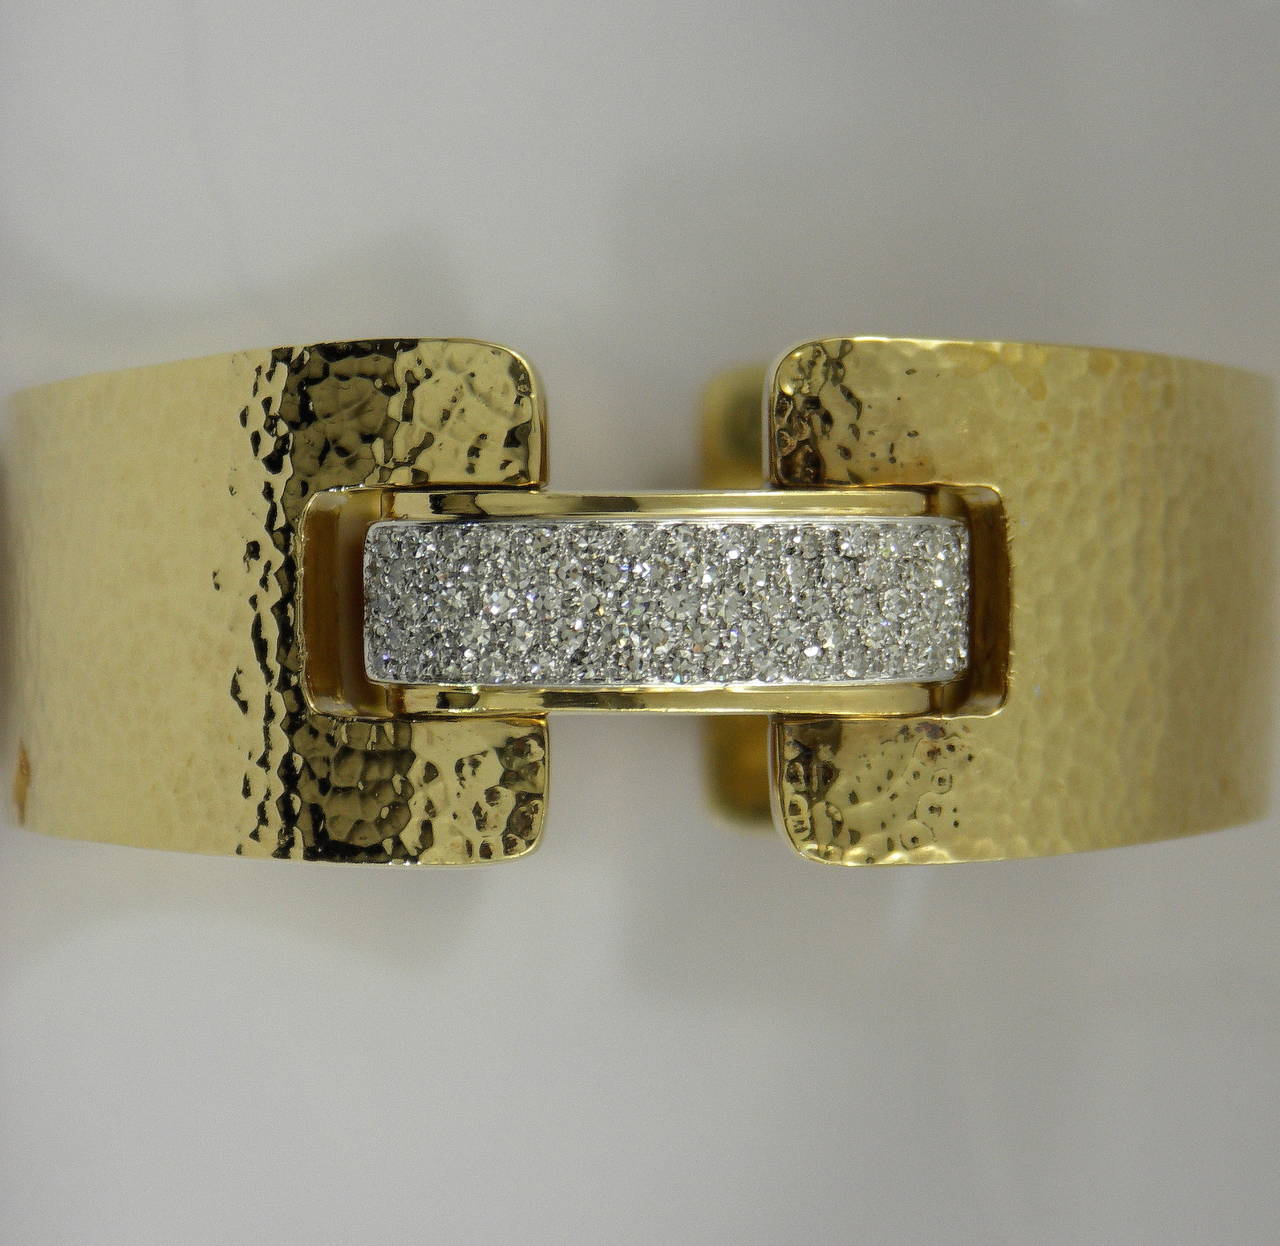 An 18K yellow gold, hammer finished bracelet set with 80 single cut diamonds, weighing 2.25 ct total approximate weight. Diamonds are F/G color and VVS2/VS1 clarity. This sleek bracelet measures 1 1/8 inches wide, and 6 3/4 inches in circumference.